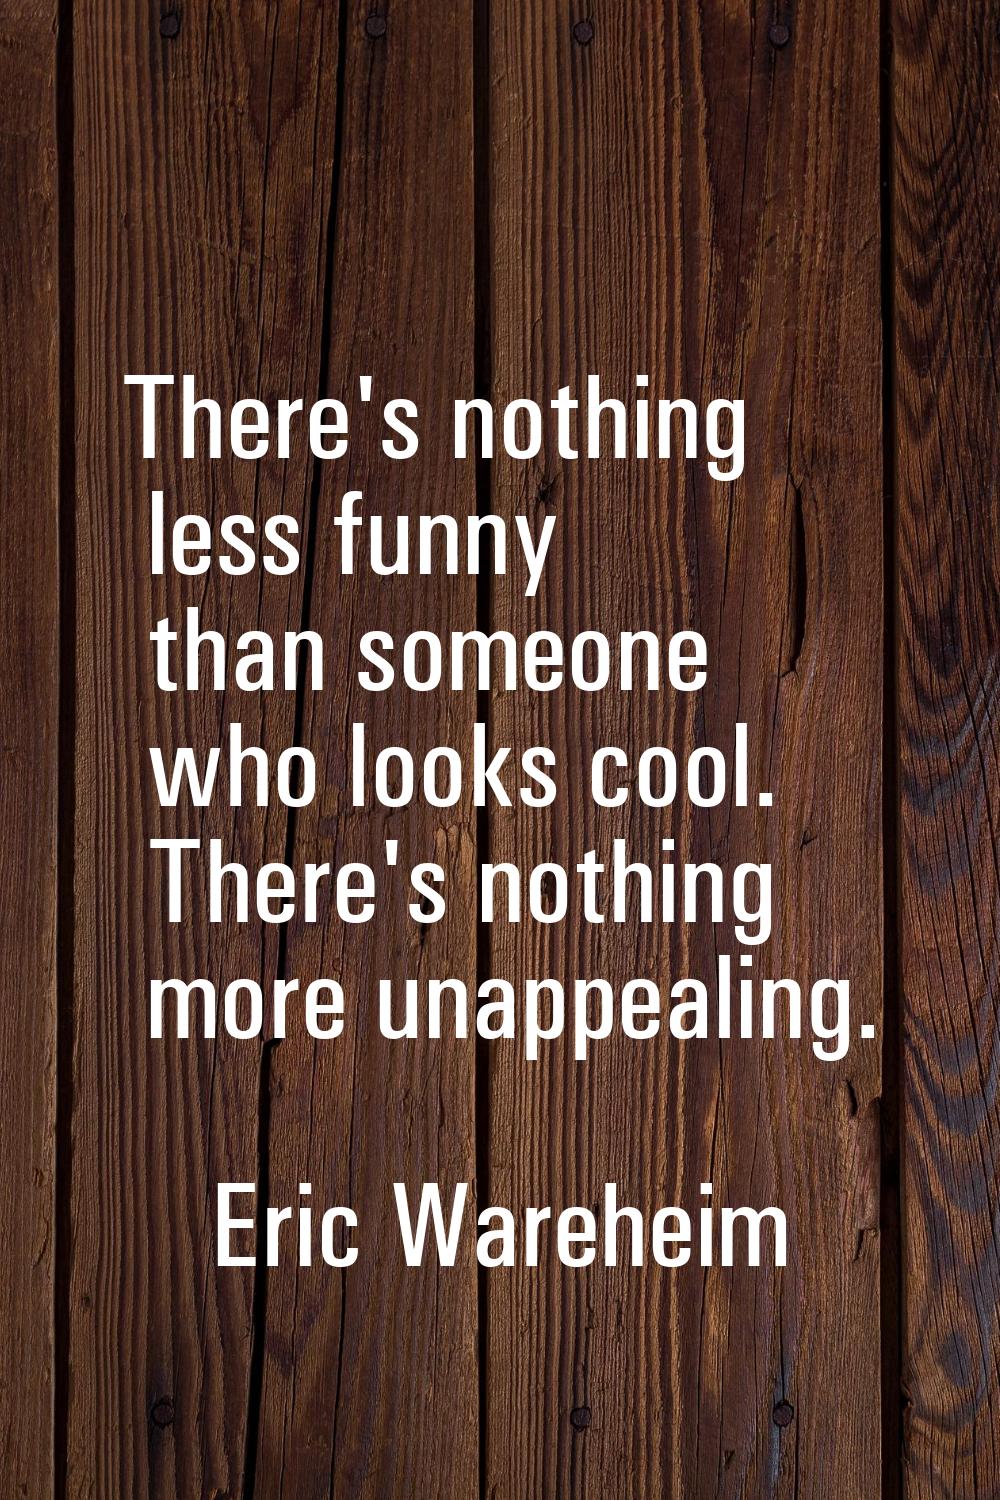 There's nothing less funny than someone who looks cool. There's nothing more unappealing.